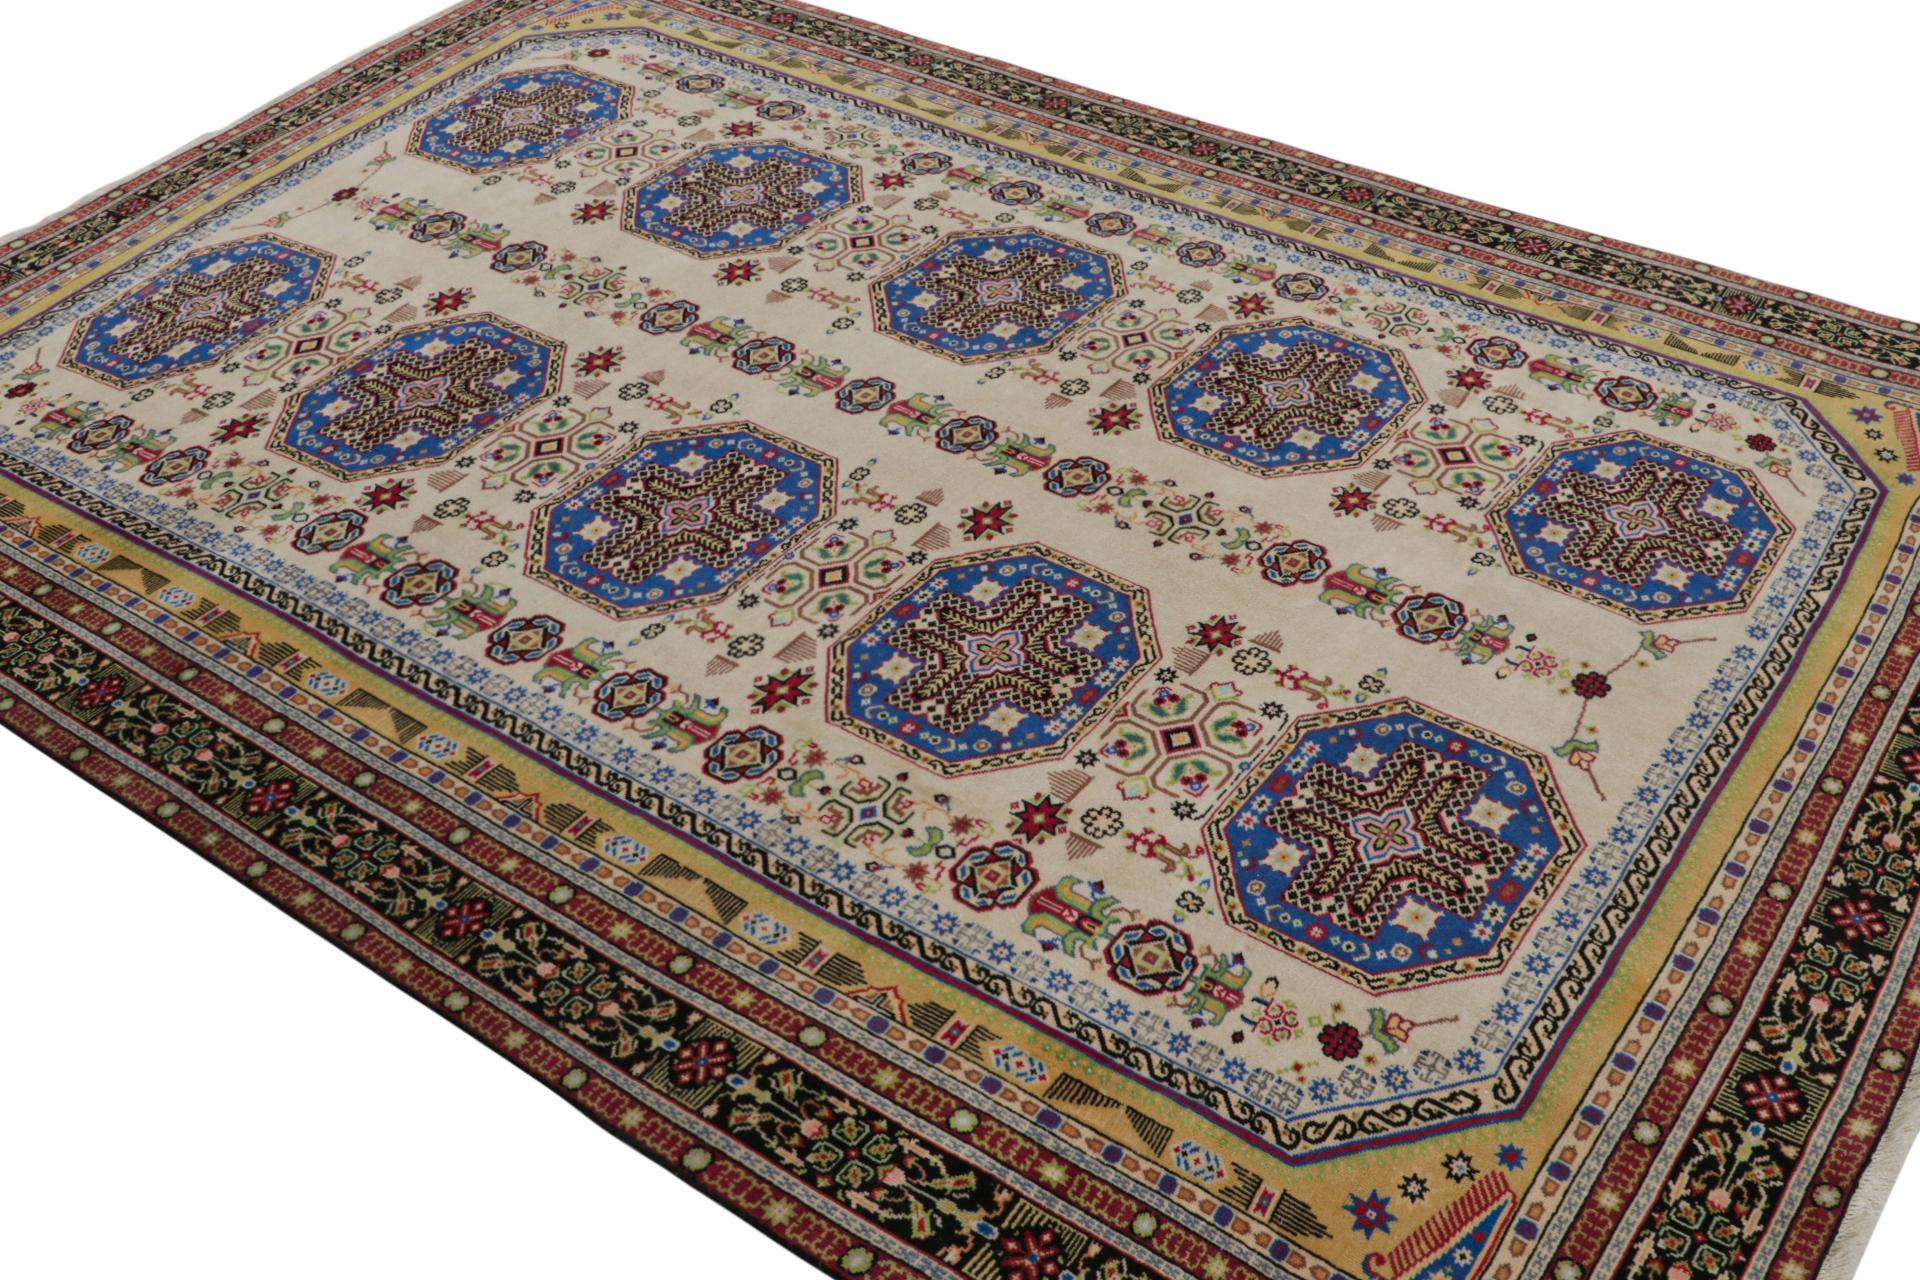 Hand knotted in wool, an 8x11 Turkish Hereke rug circa 1970-1980 - latest to join Rug & Kilim’s vintage selections.

On the Design:


Keen eyes will observe beige underscoring colorful medallions in saturated, vibrant jewel tones with an especially